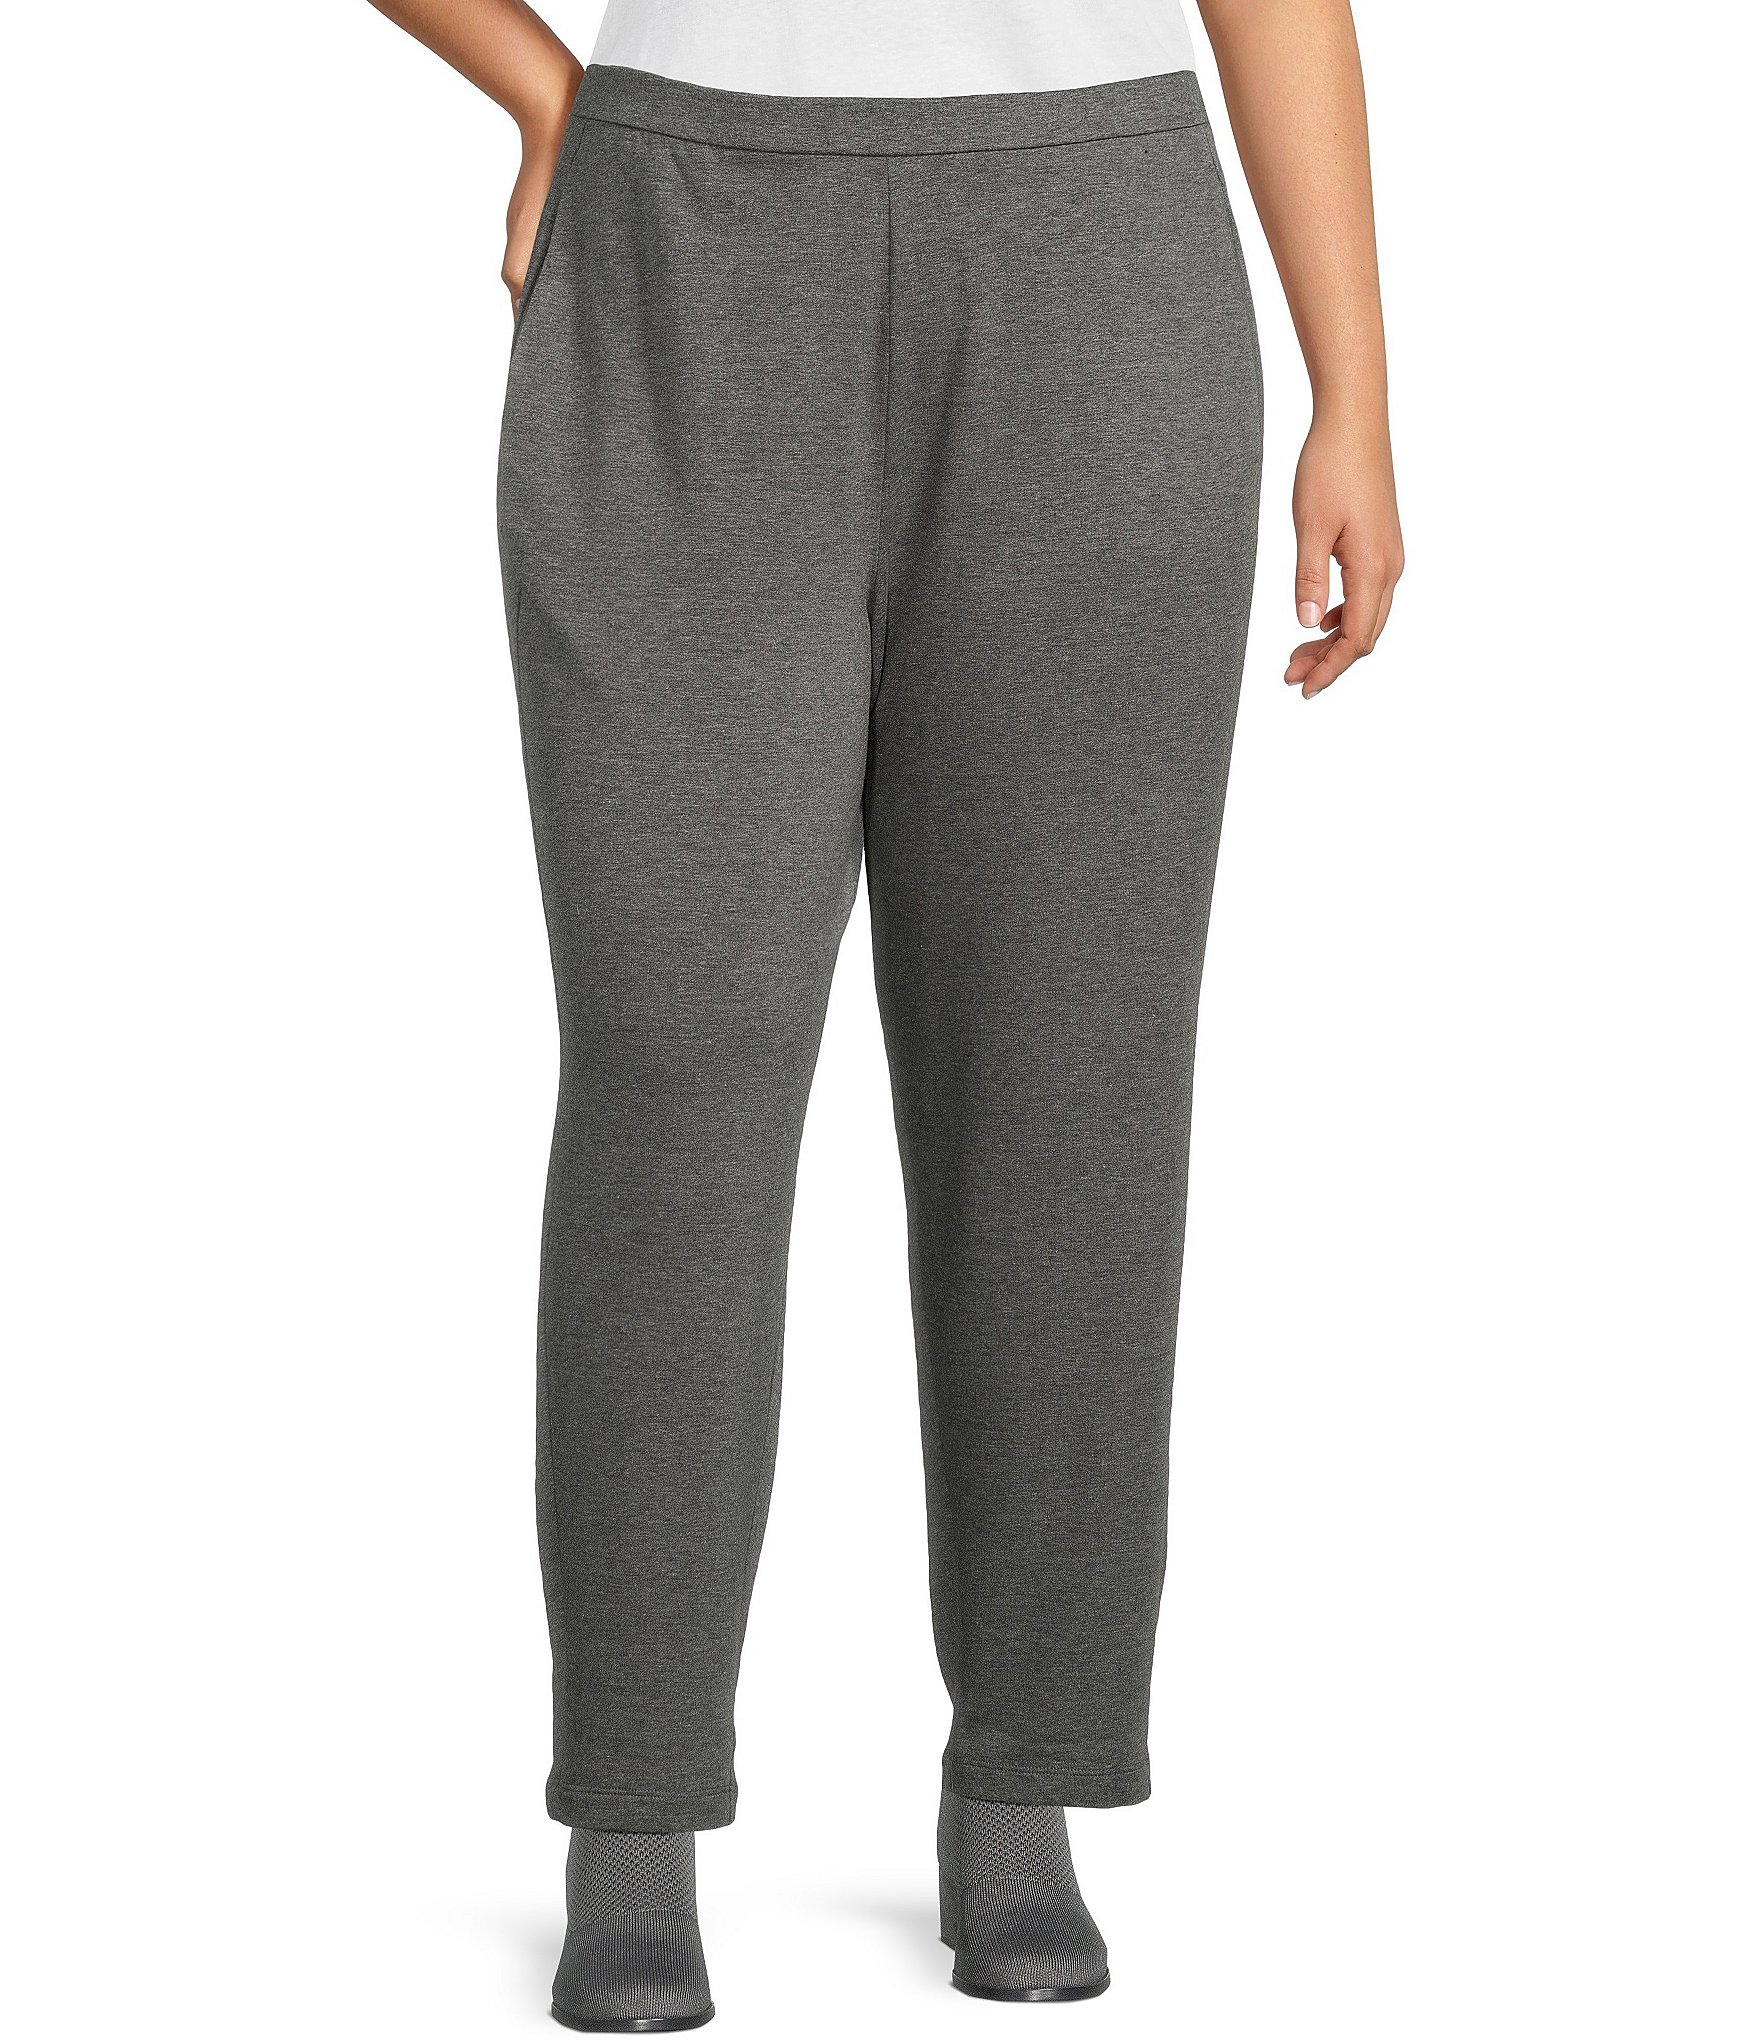 https://dimg.dillards.com/is/image/DillardsZoom/zoom/eileen-fisher-plus-size-cozy-brushed-terry-pocketed-slouch-ankle-pants/00000000_zi_733b6f67-f365-451b-a3b1-71ebbbe294aa.jpg